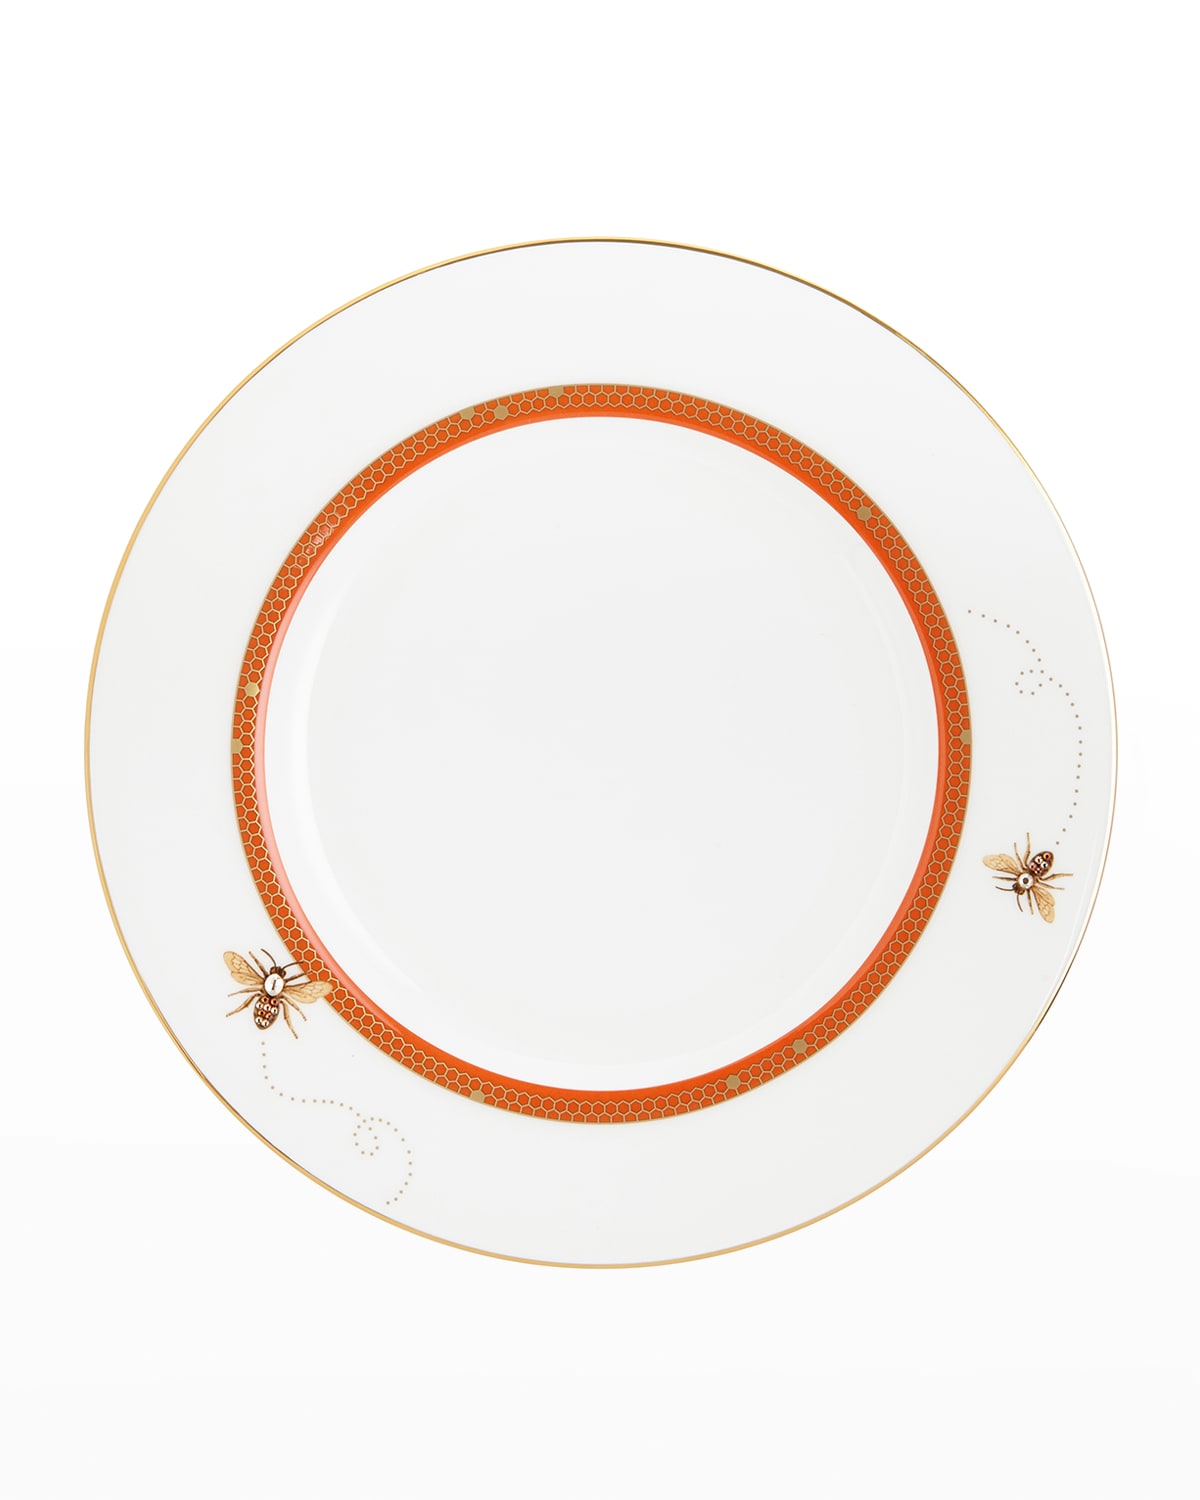 Shop Prouna My Honeybee Dinner Plate With Crystal Details In Gold Orange